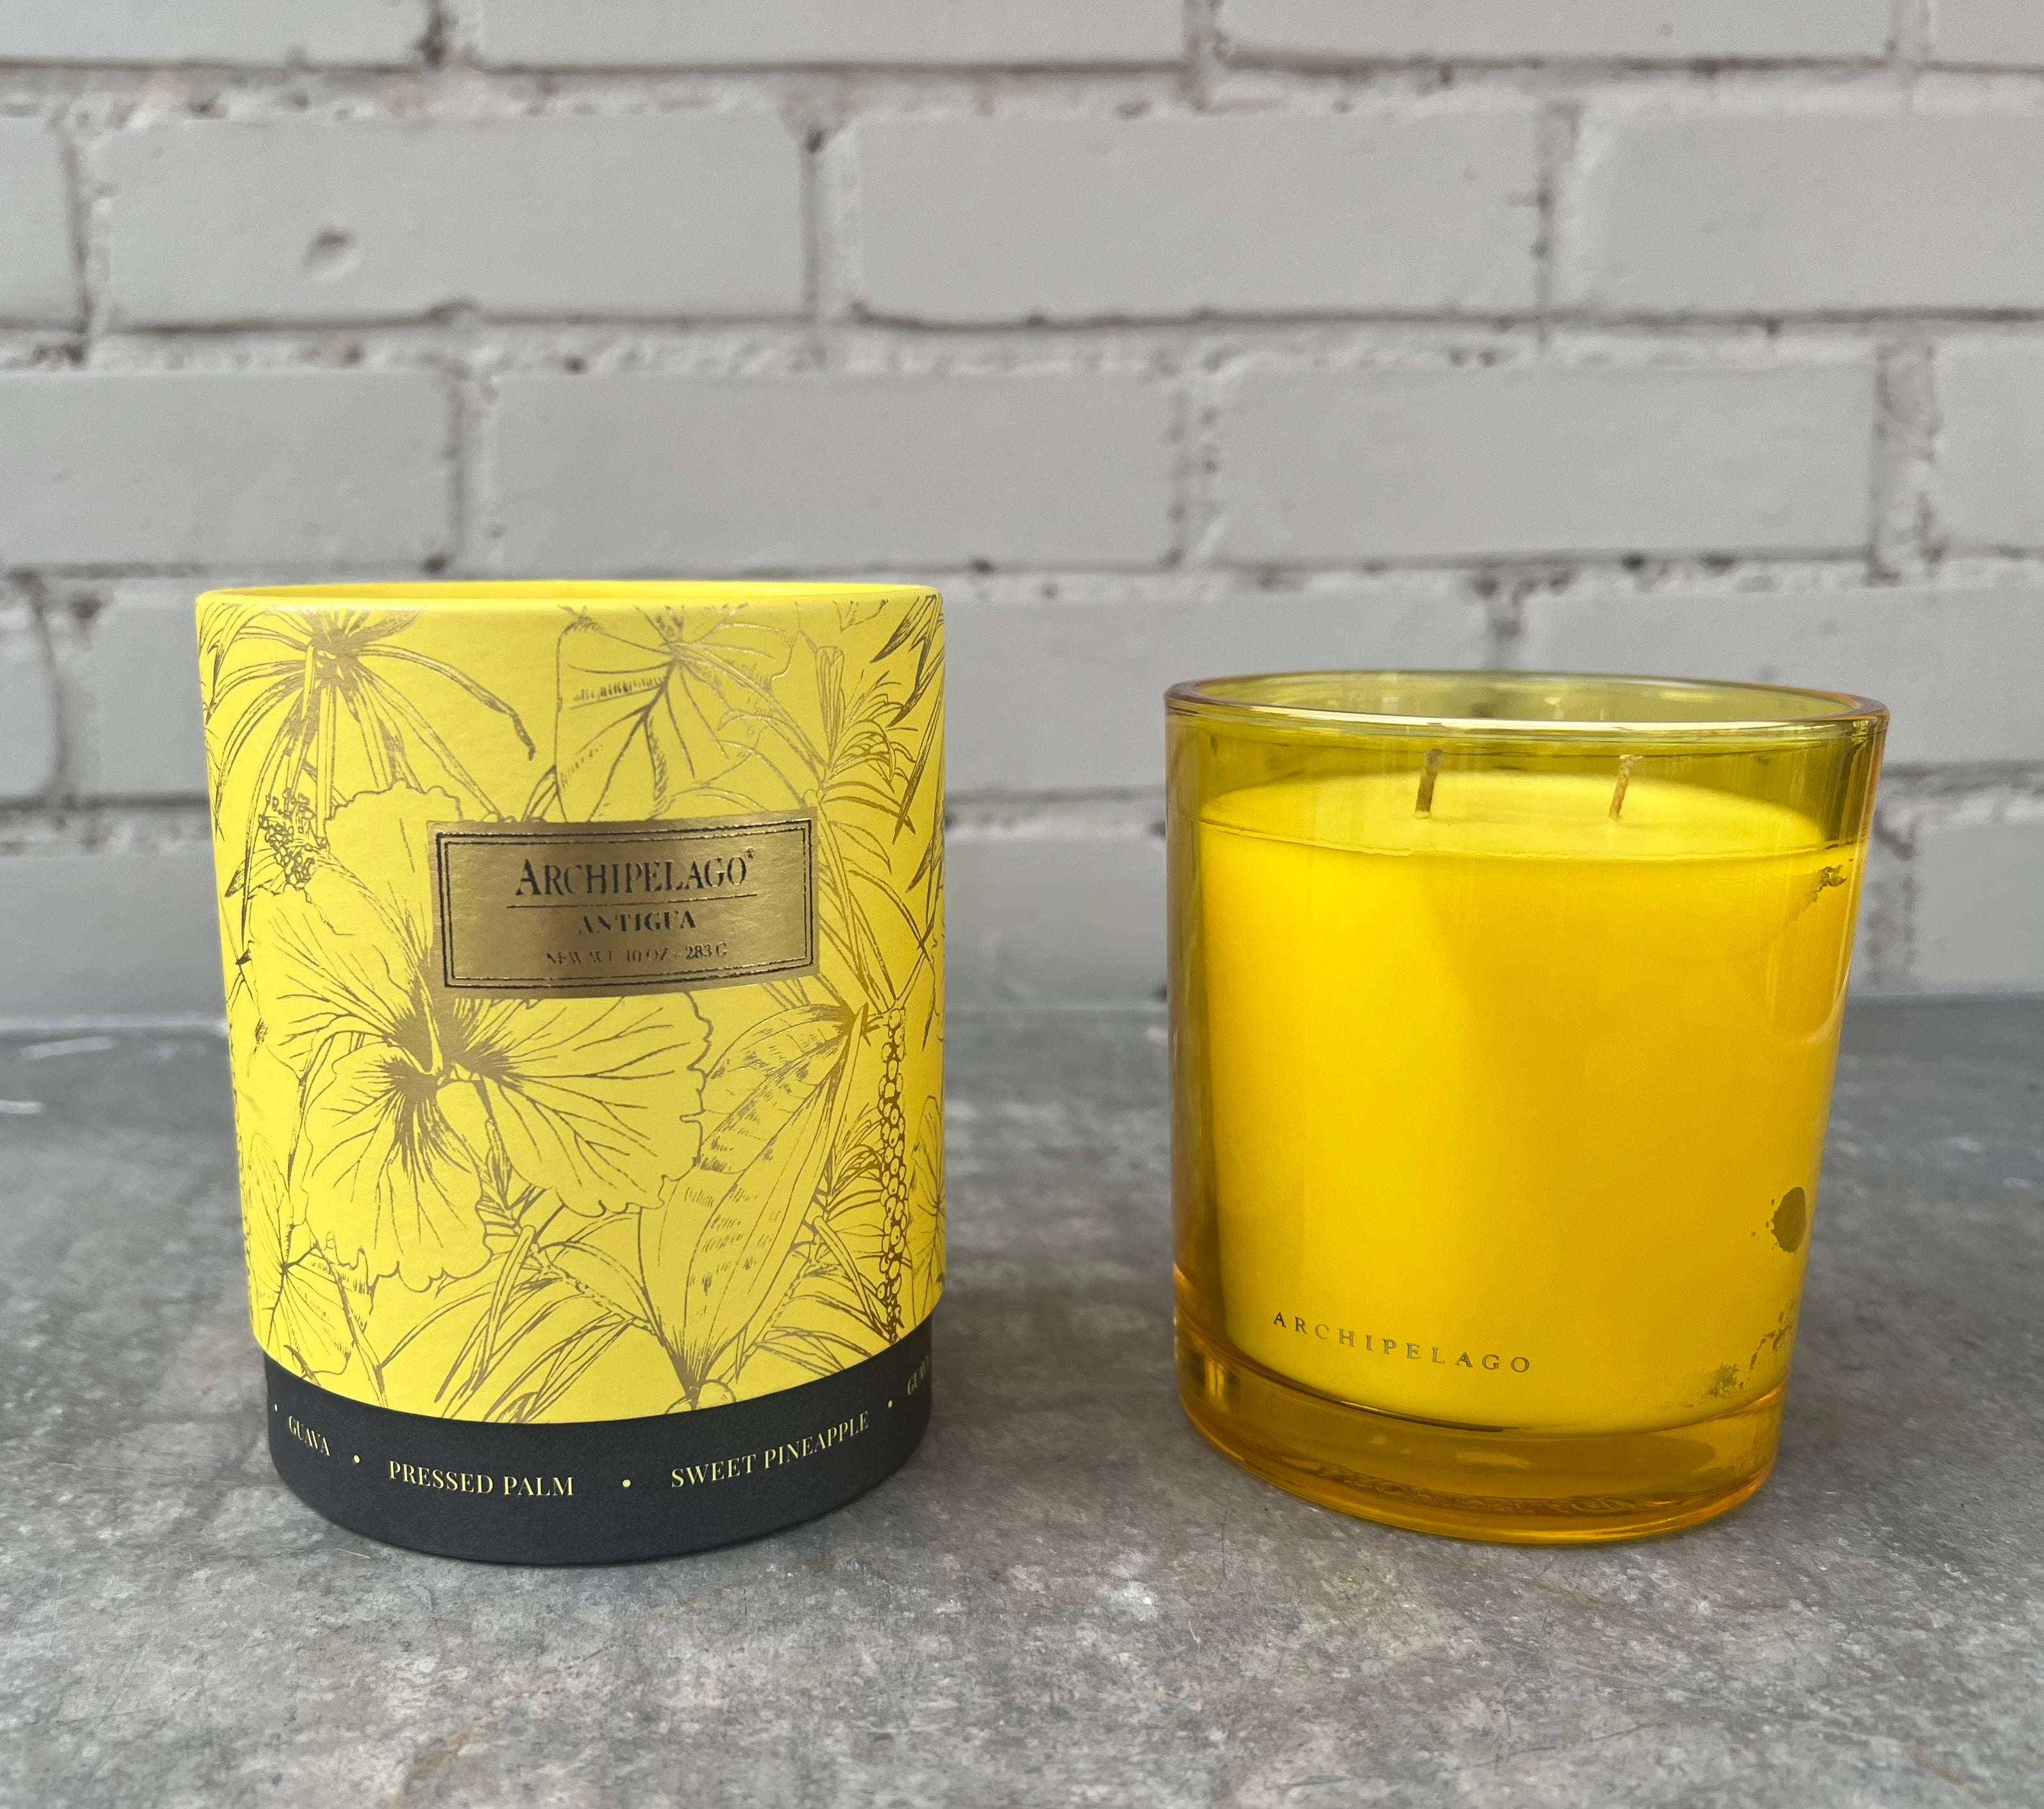 Antigua Boxed Candle by Archipelago